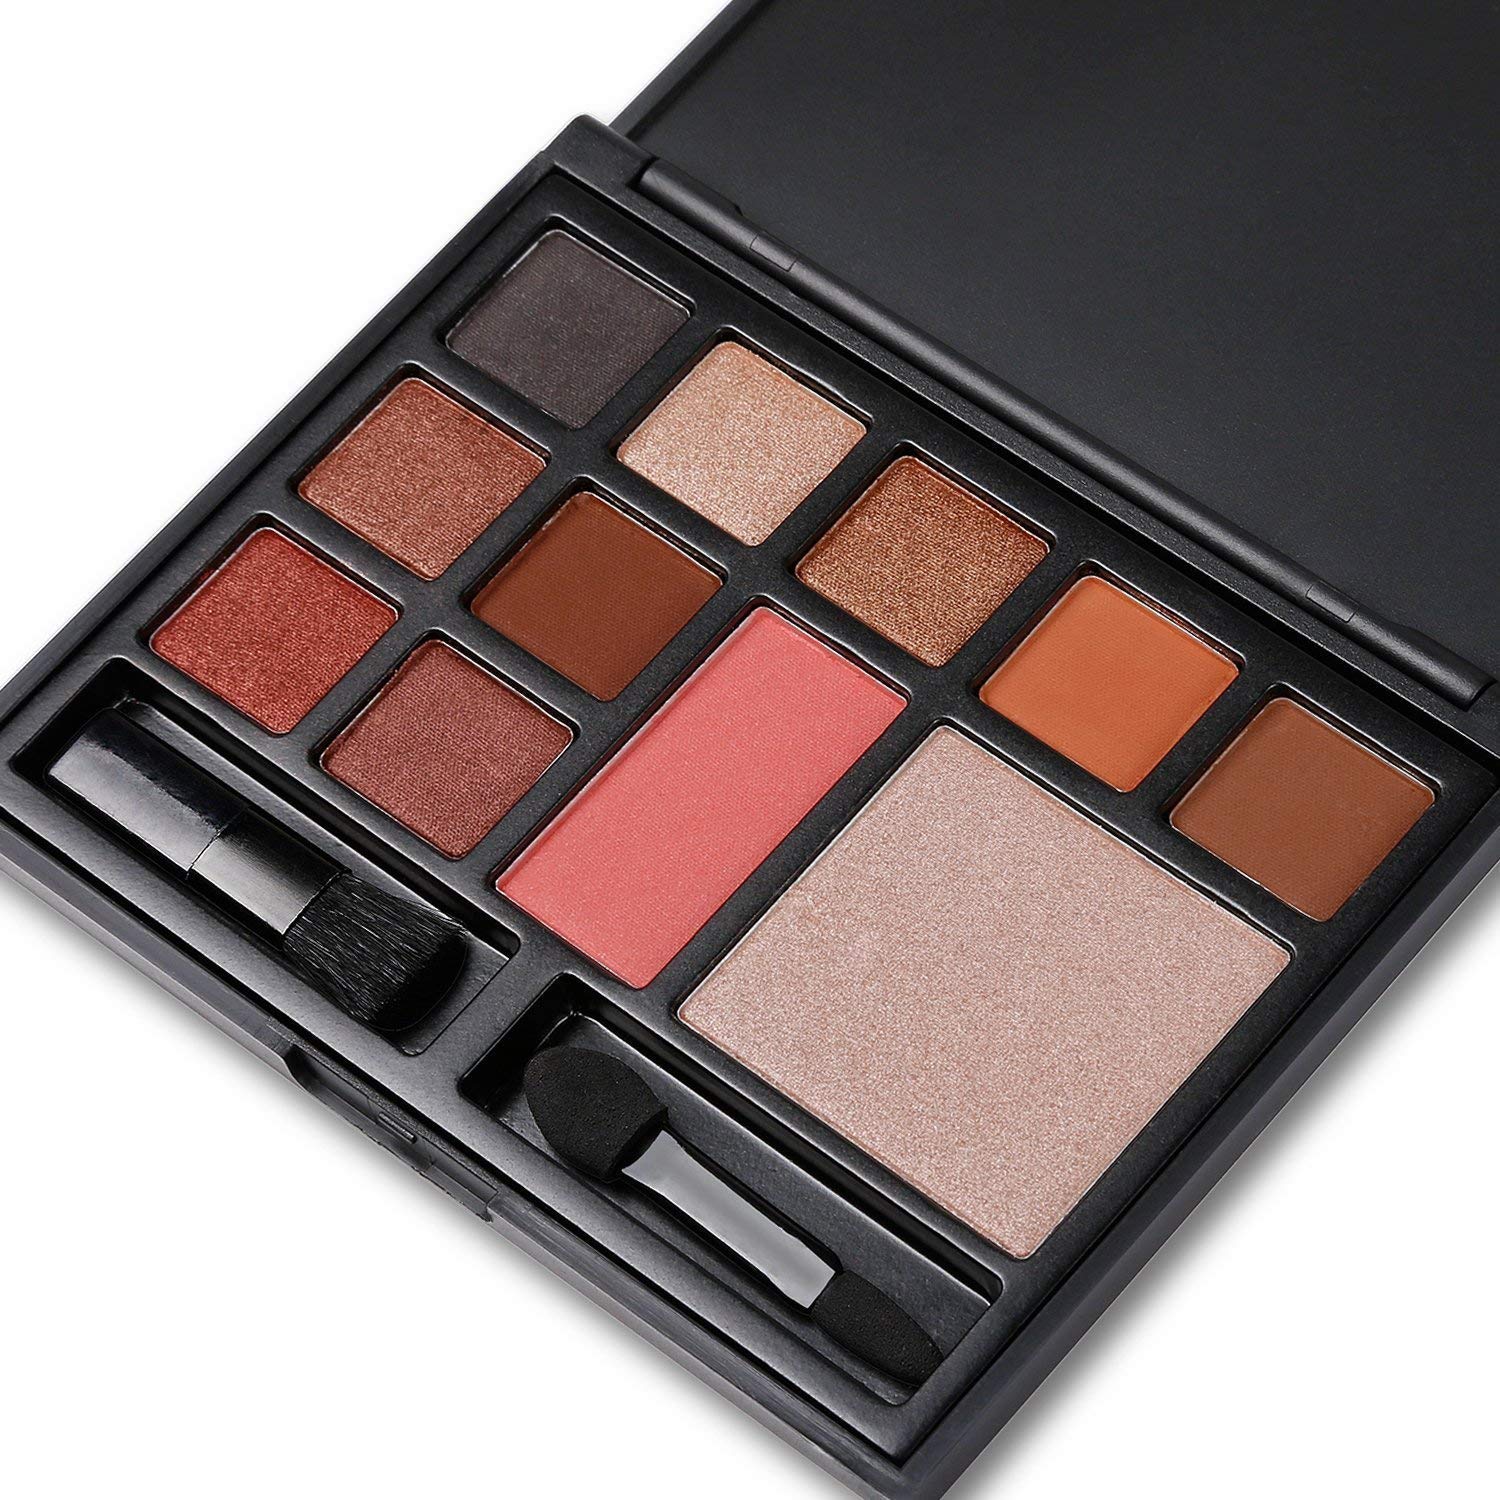 DONGXIUB Eyeshadow Makeup Palette Shimmer + Matte 11 Colors Highly Nude Warm Eye Shadow